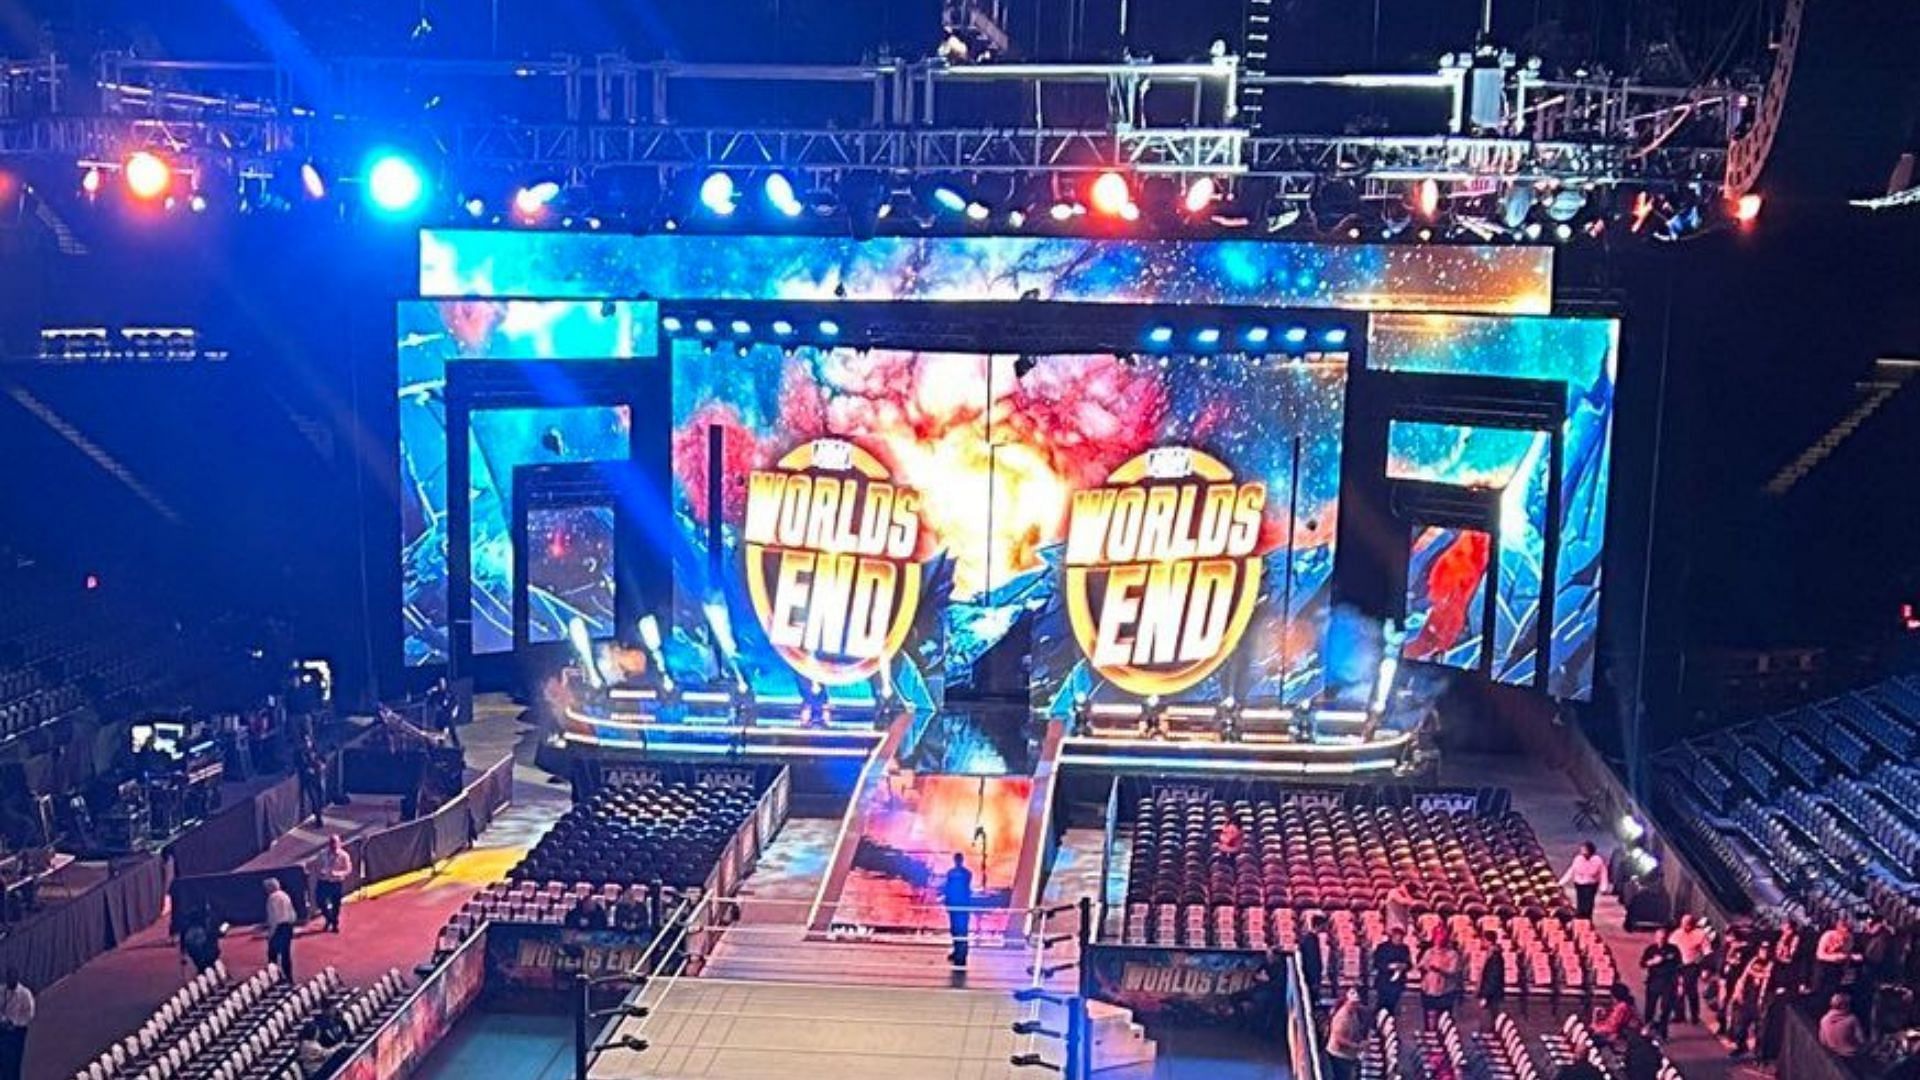 AEW Worlds End is the promotion